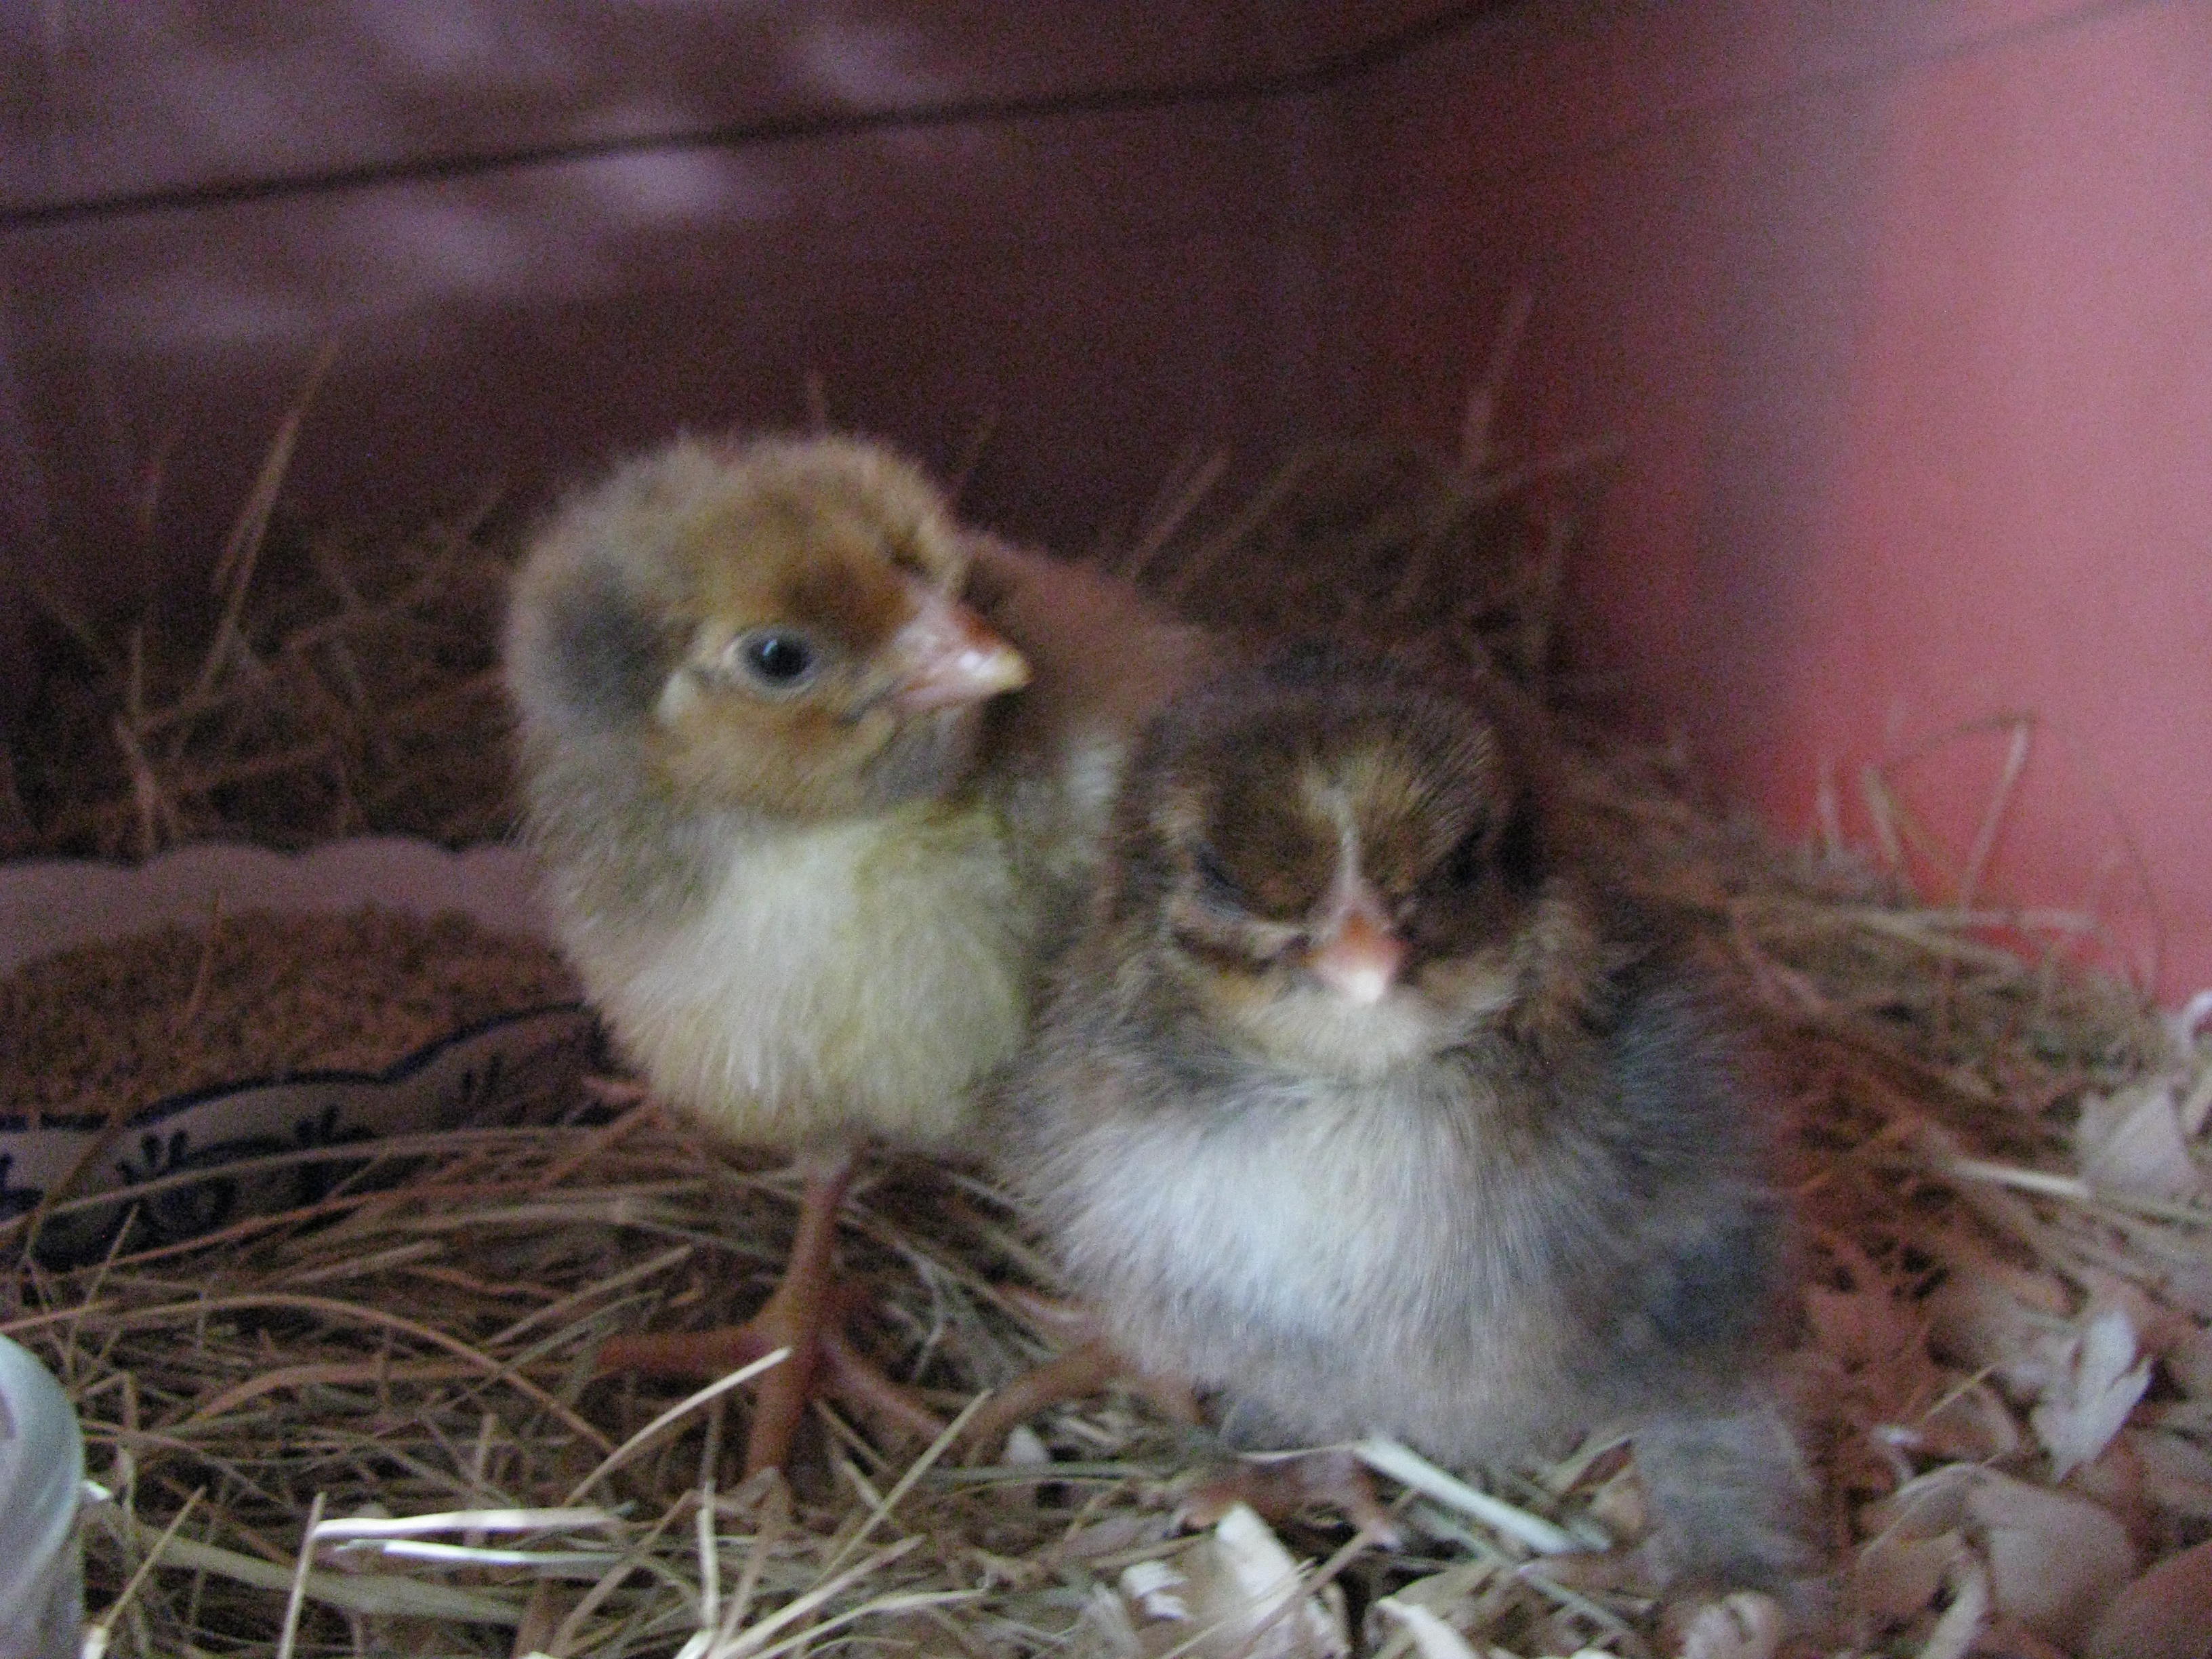 My newest chicks, 3 days old ! The larger one is a Blue Laced Red Wyandotte and the smaller brownish one is a Mille De Fleur Bantum Cochin. Too cute !